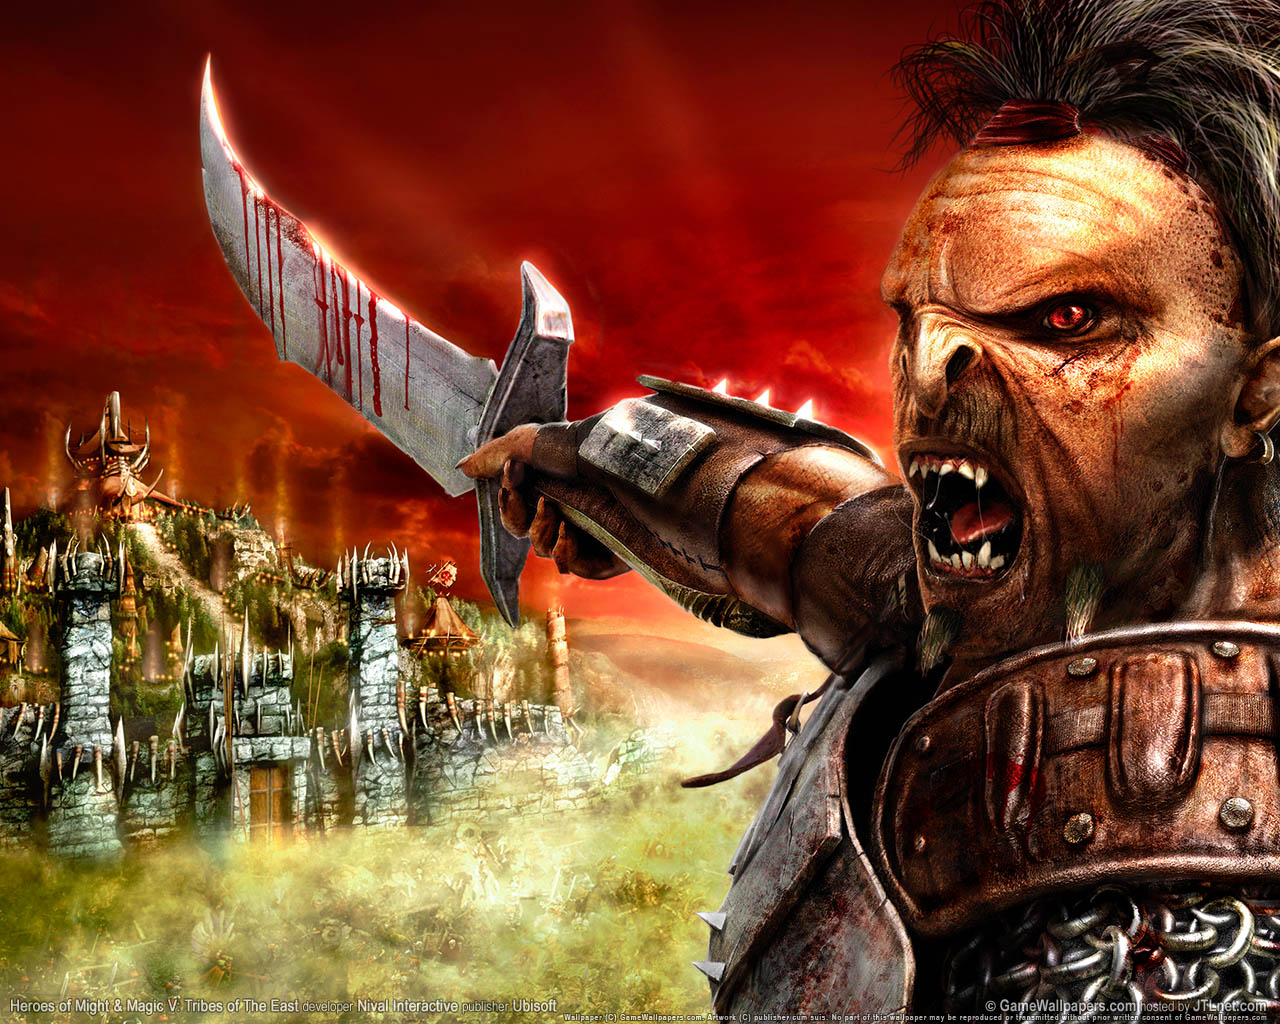 Heroes of Might %26 Magic 5%3A Tribes of The East wallpaper 01 1280x1024